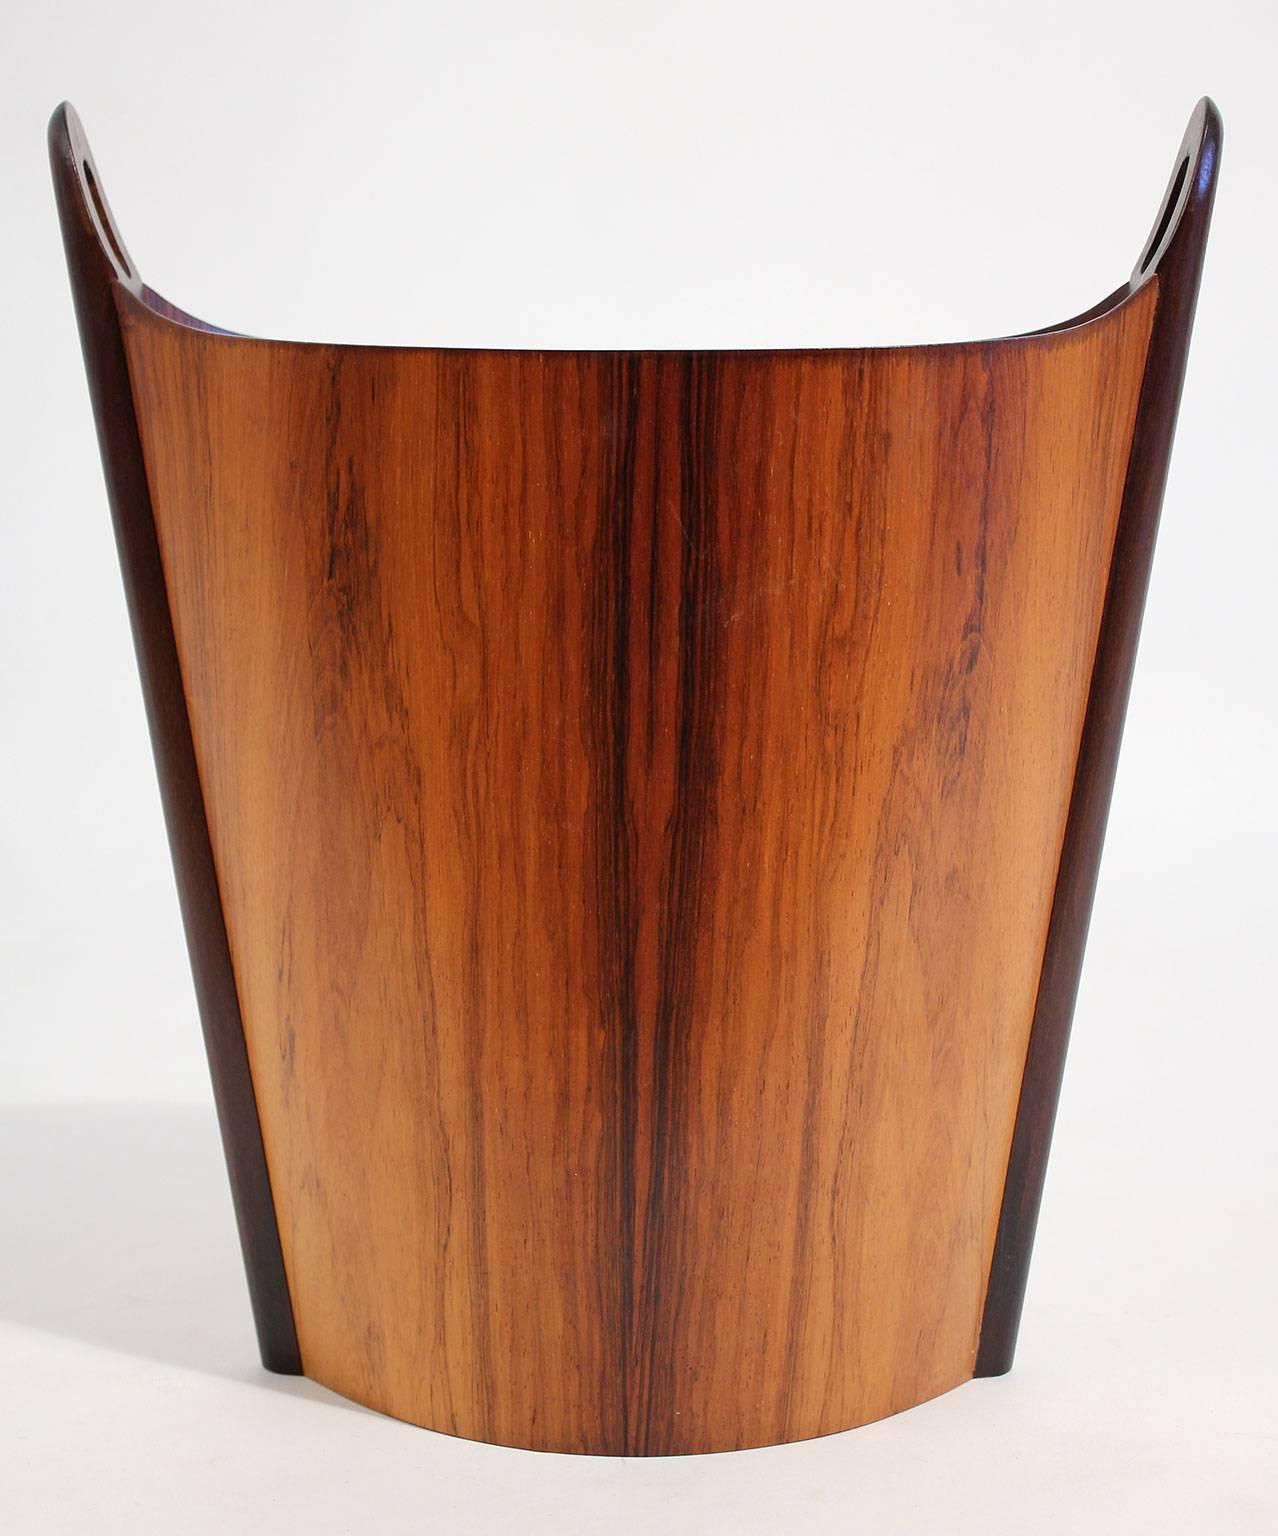 Modernist rosewood wastebasket designed by Einar Barnes for P.S. Heggen, circa 1960s. Made in Norway and is marked by the designer. In excellent vintage condition with no issues to mention. Rosewood has beautiful natural color and grain. Great